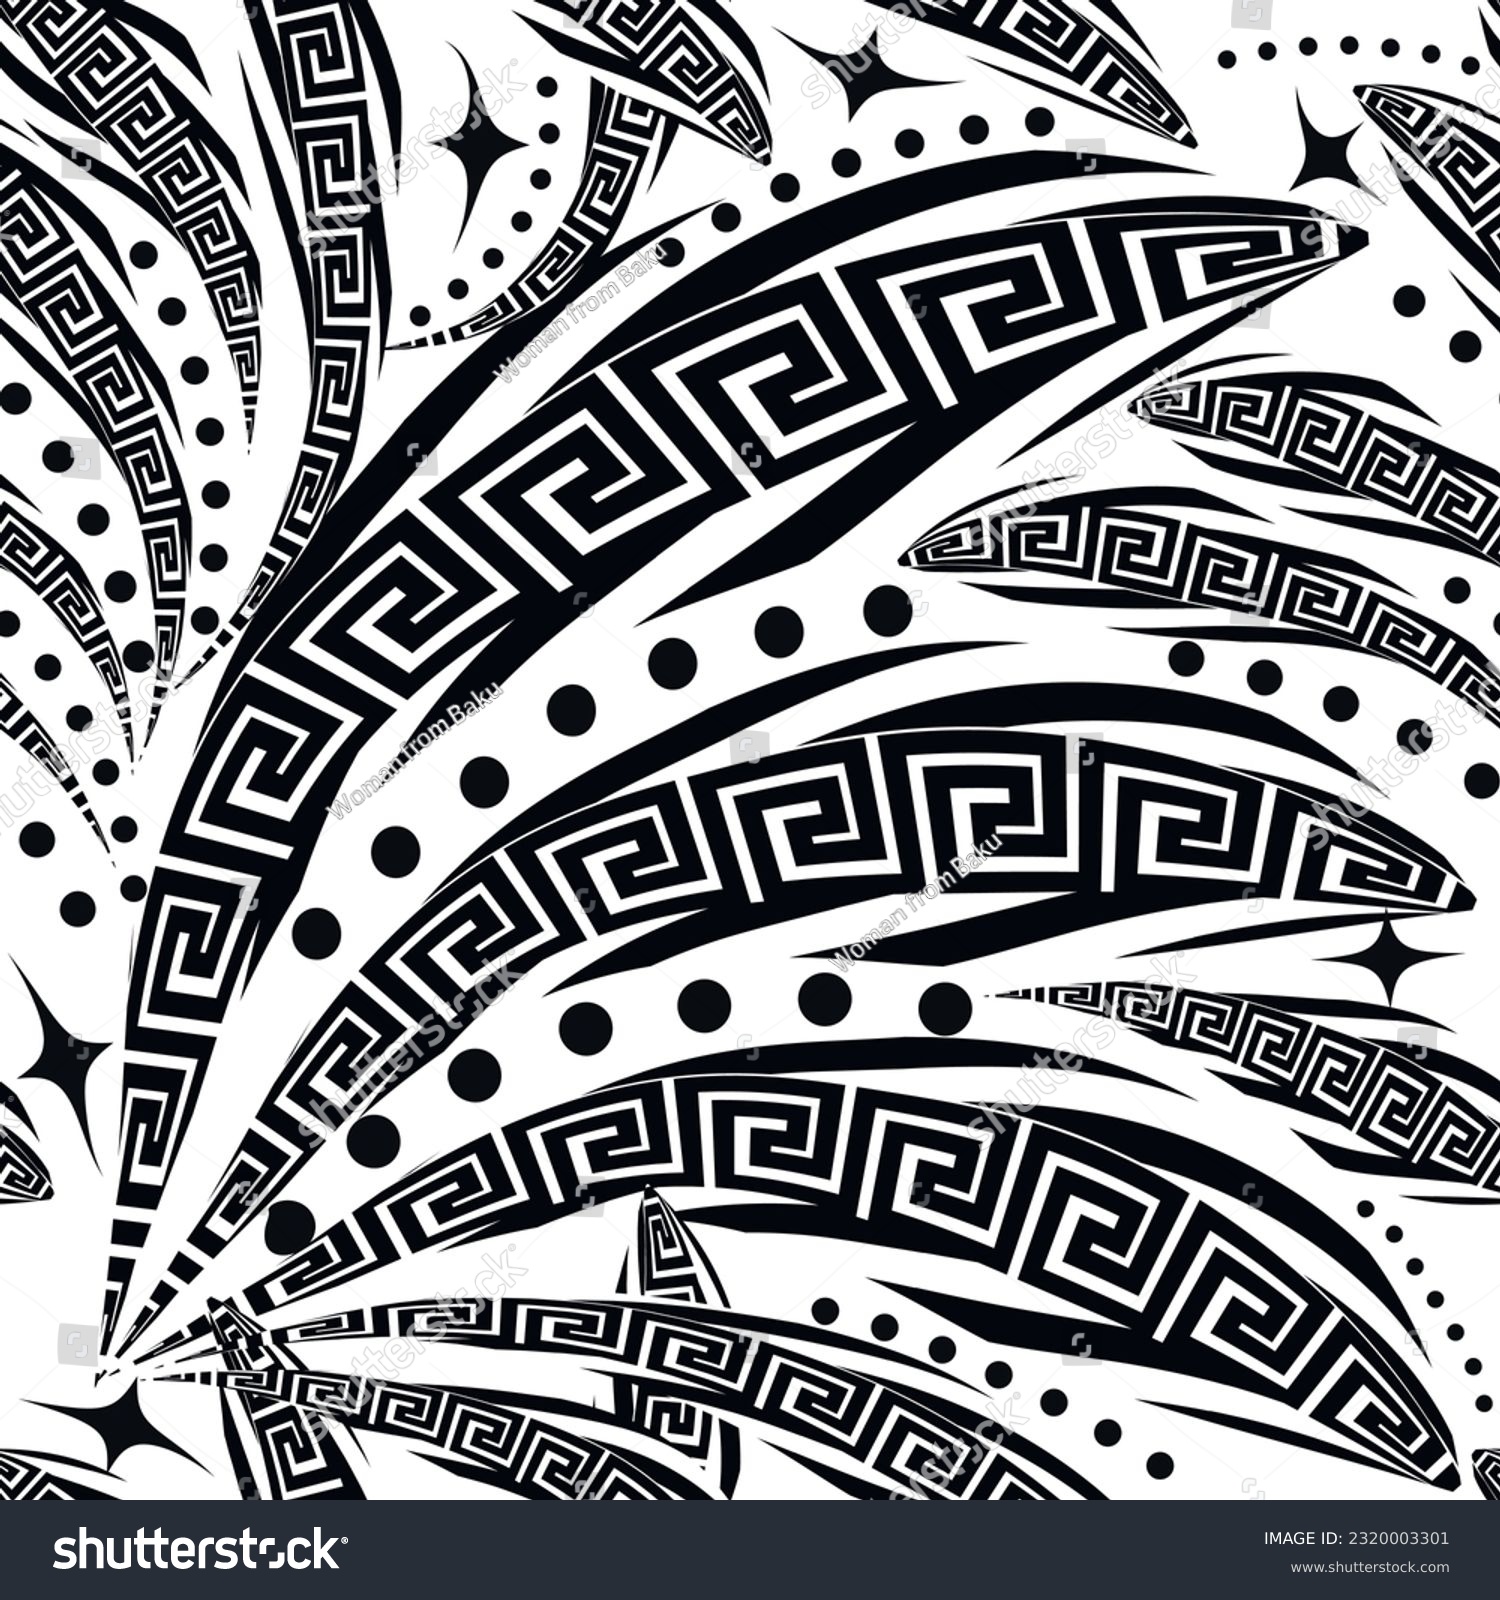 Abstract ornamental hand drawn greek style floral seamless pattern. Tribal ethnic style patterned vector background. Greek key meanders, flowers, leaves, circles, dots. Black and white ornaments. #2320003301